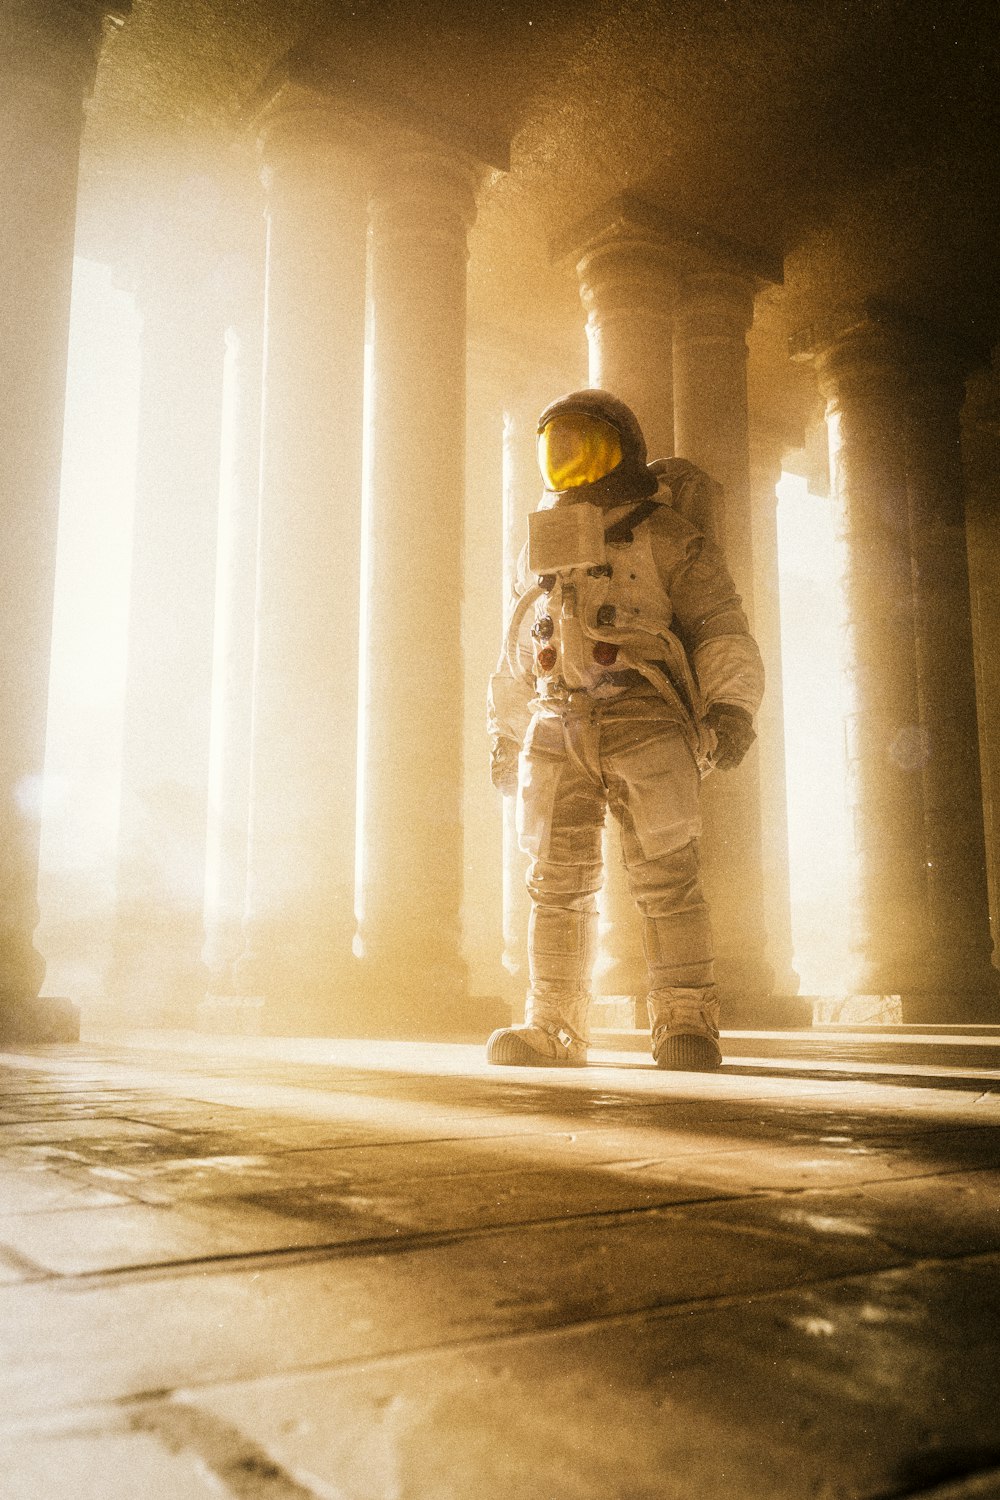 a man in a space suit standing next to columns